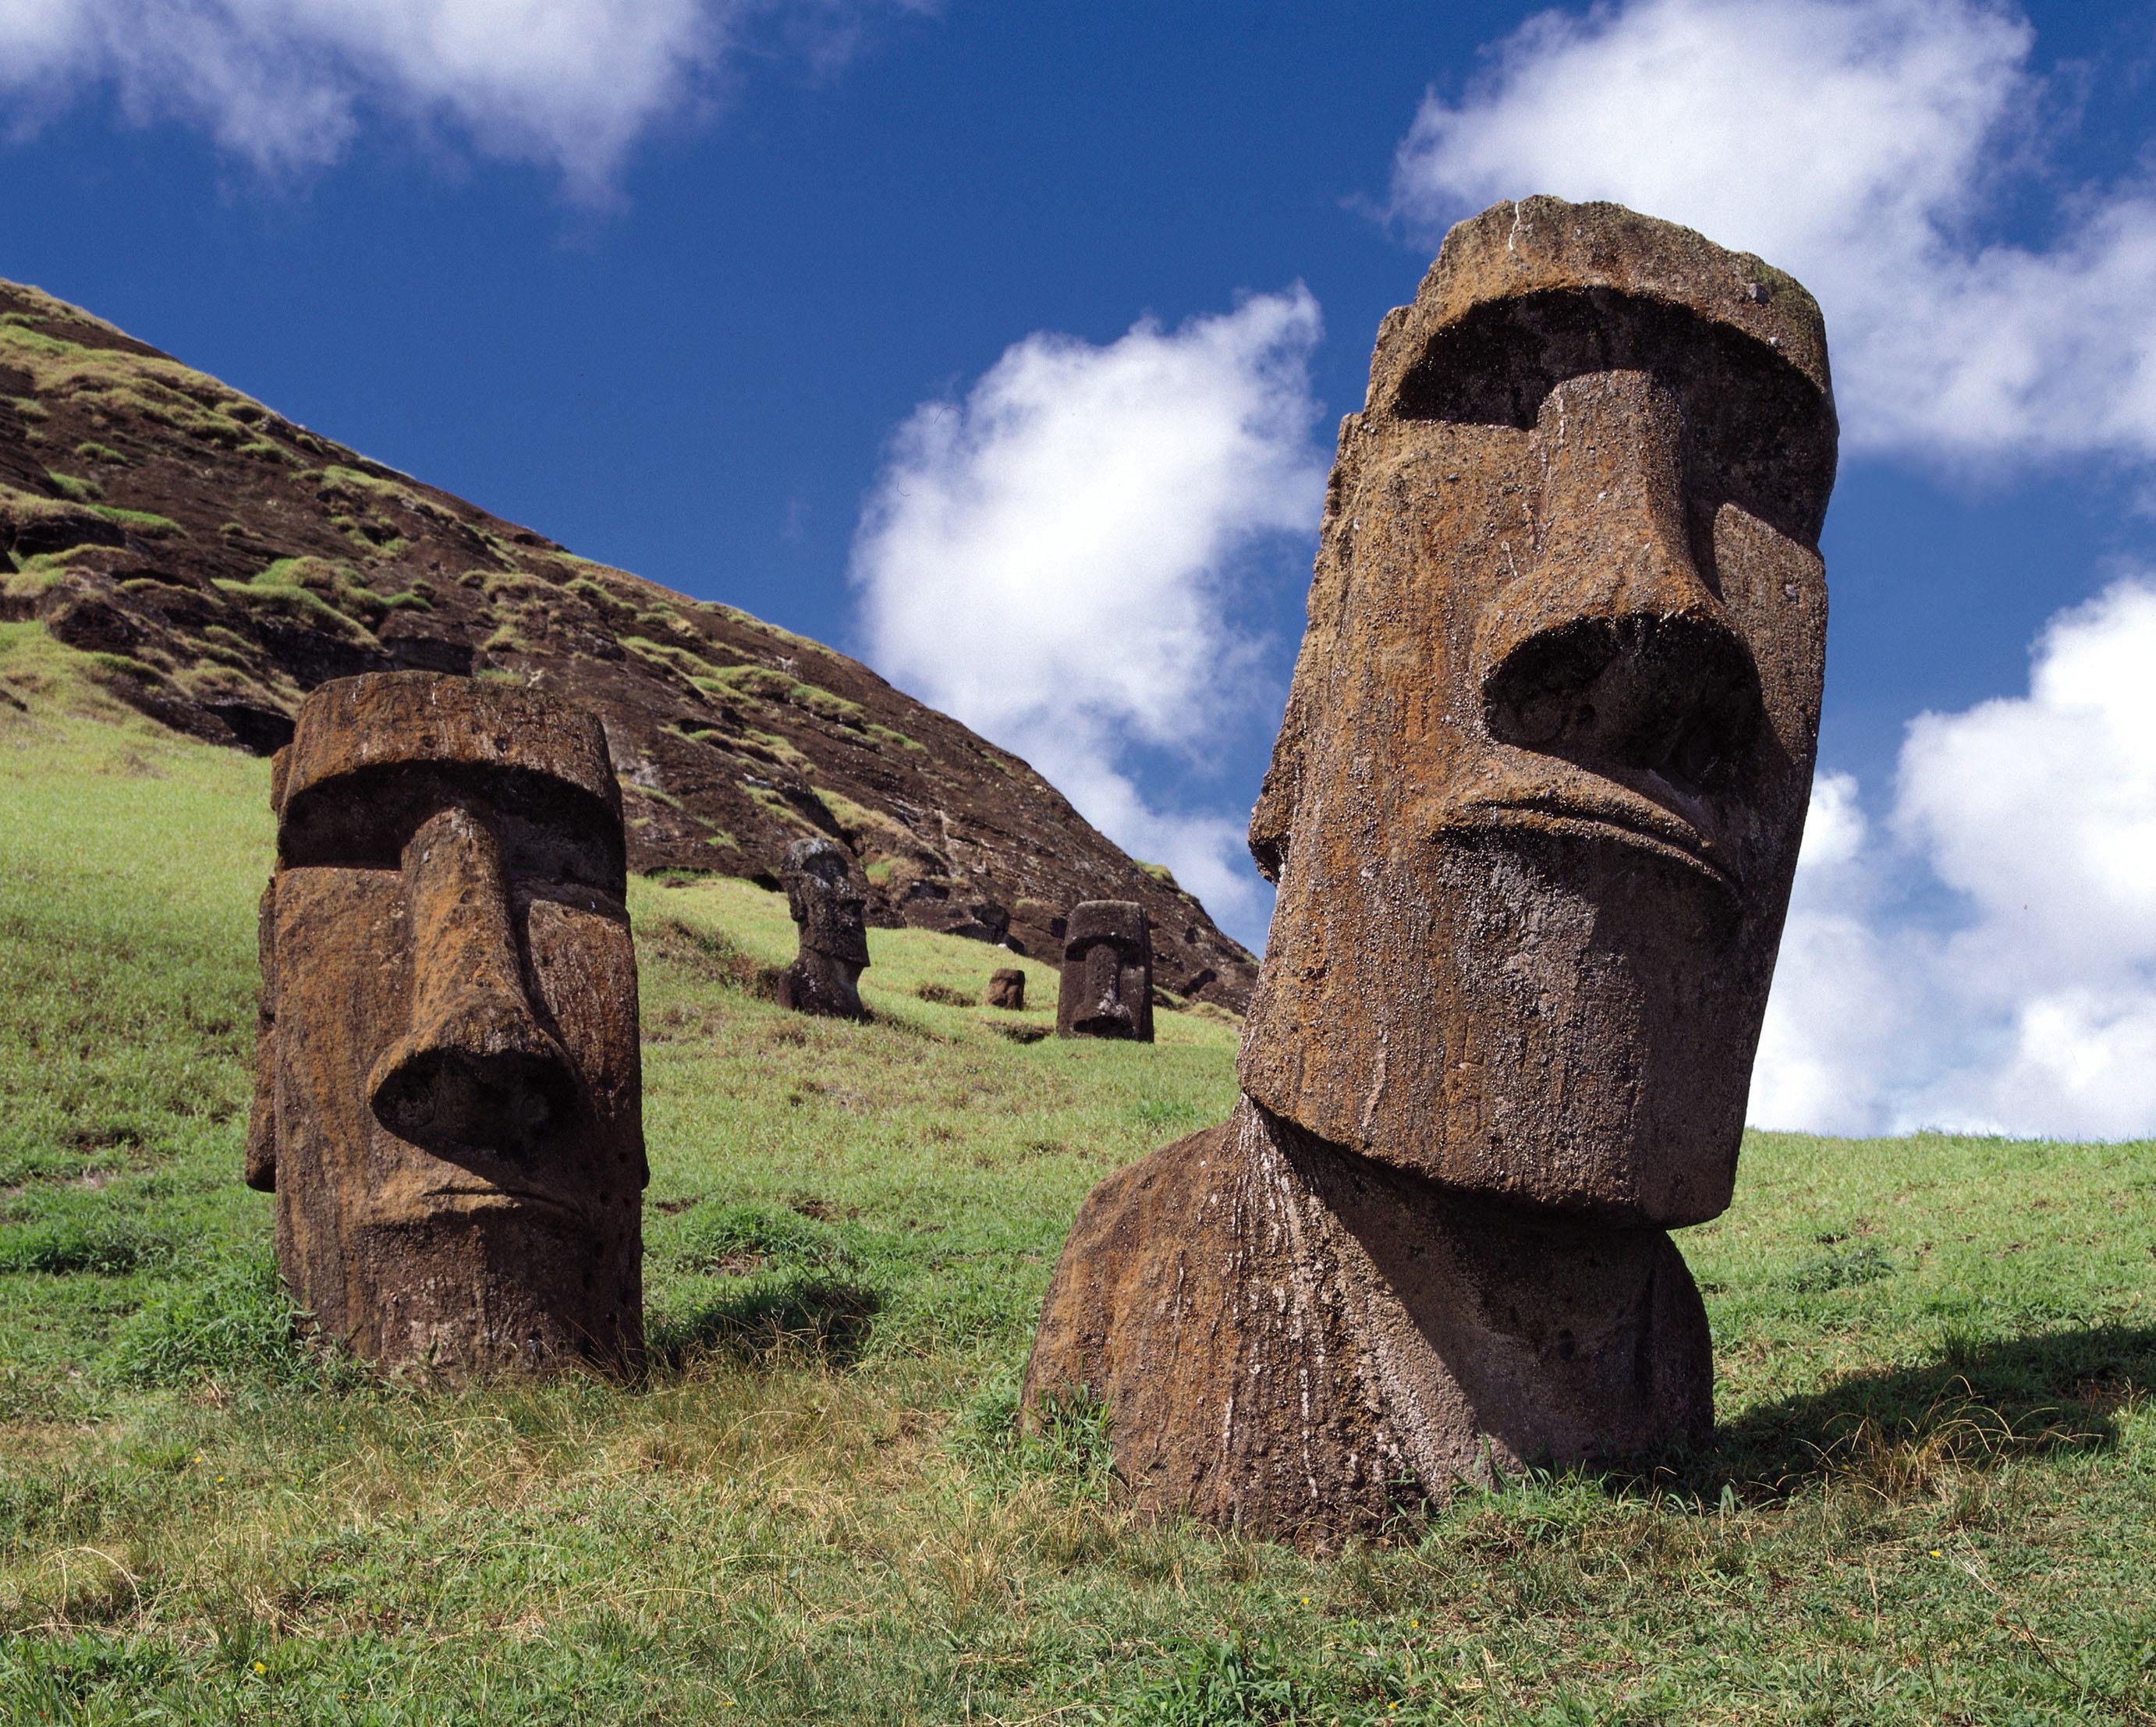 Gallery For > Easter Island Wallpaper